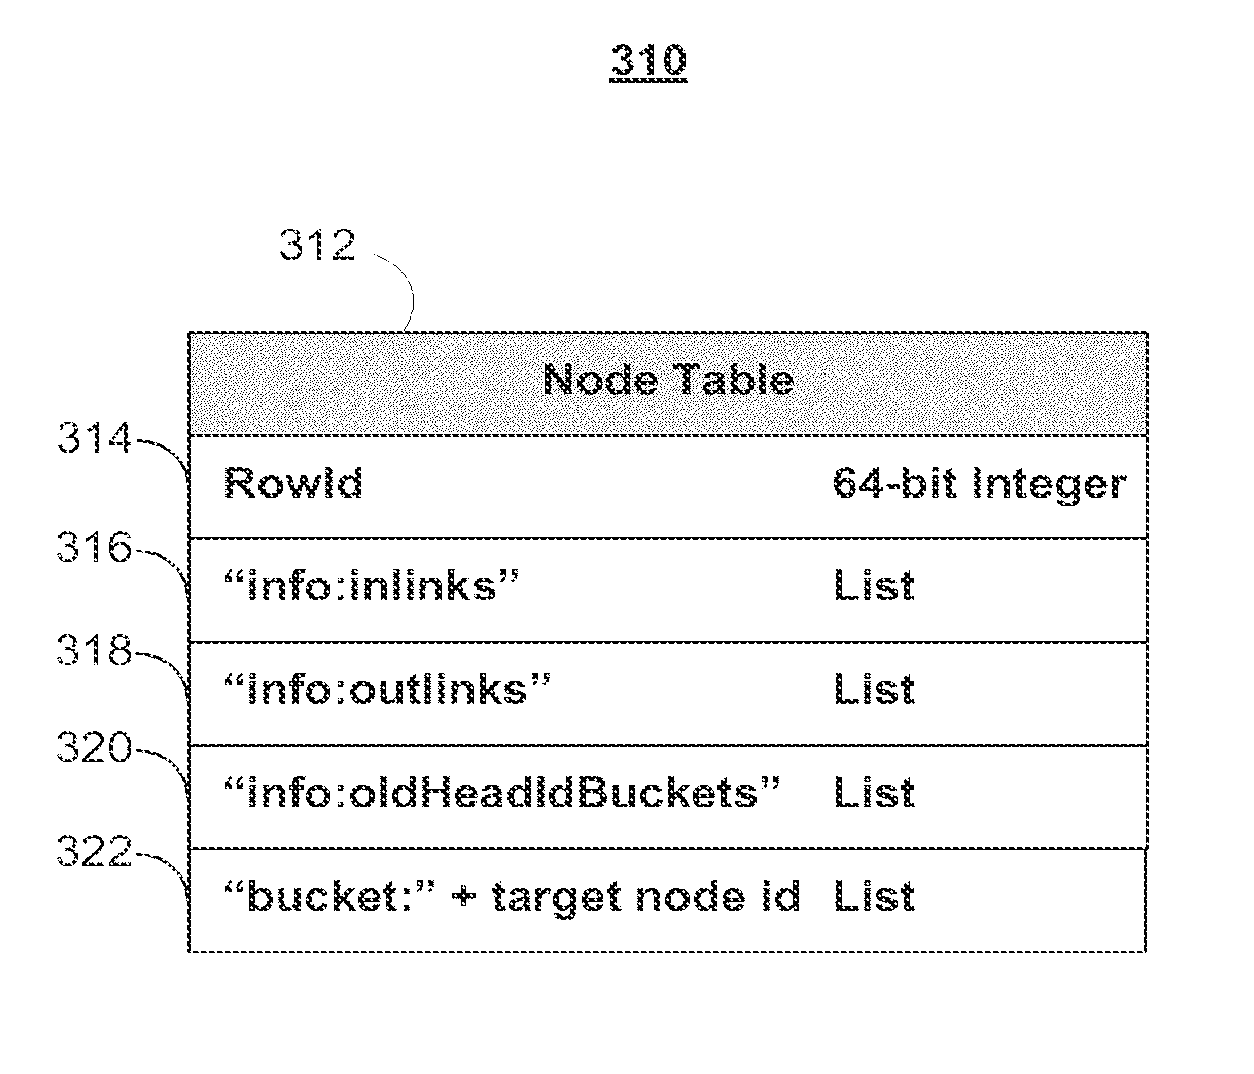 Systems and methods for social graph data analytics to determine connectivity within a community